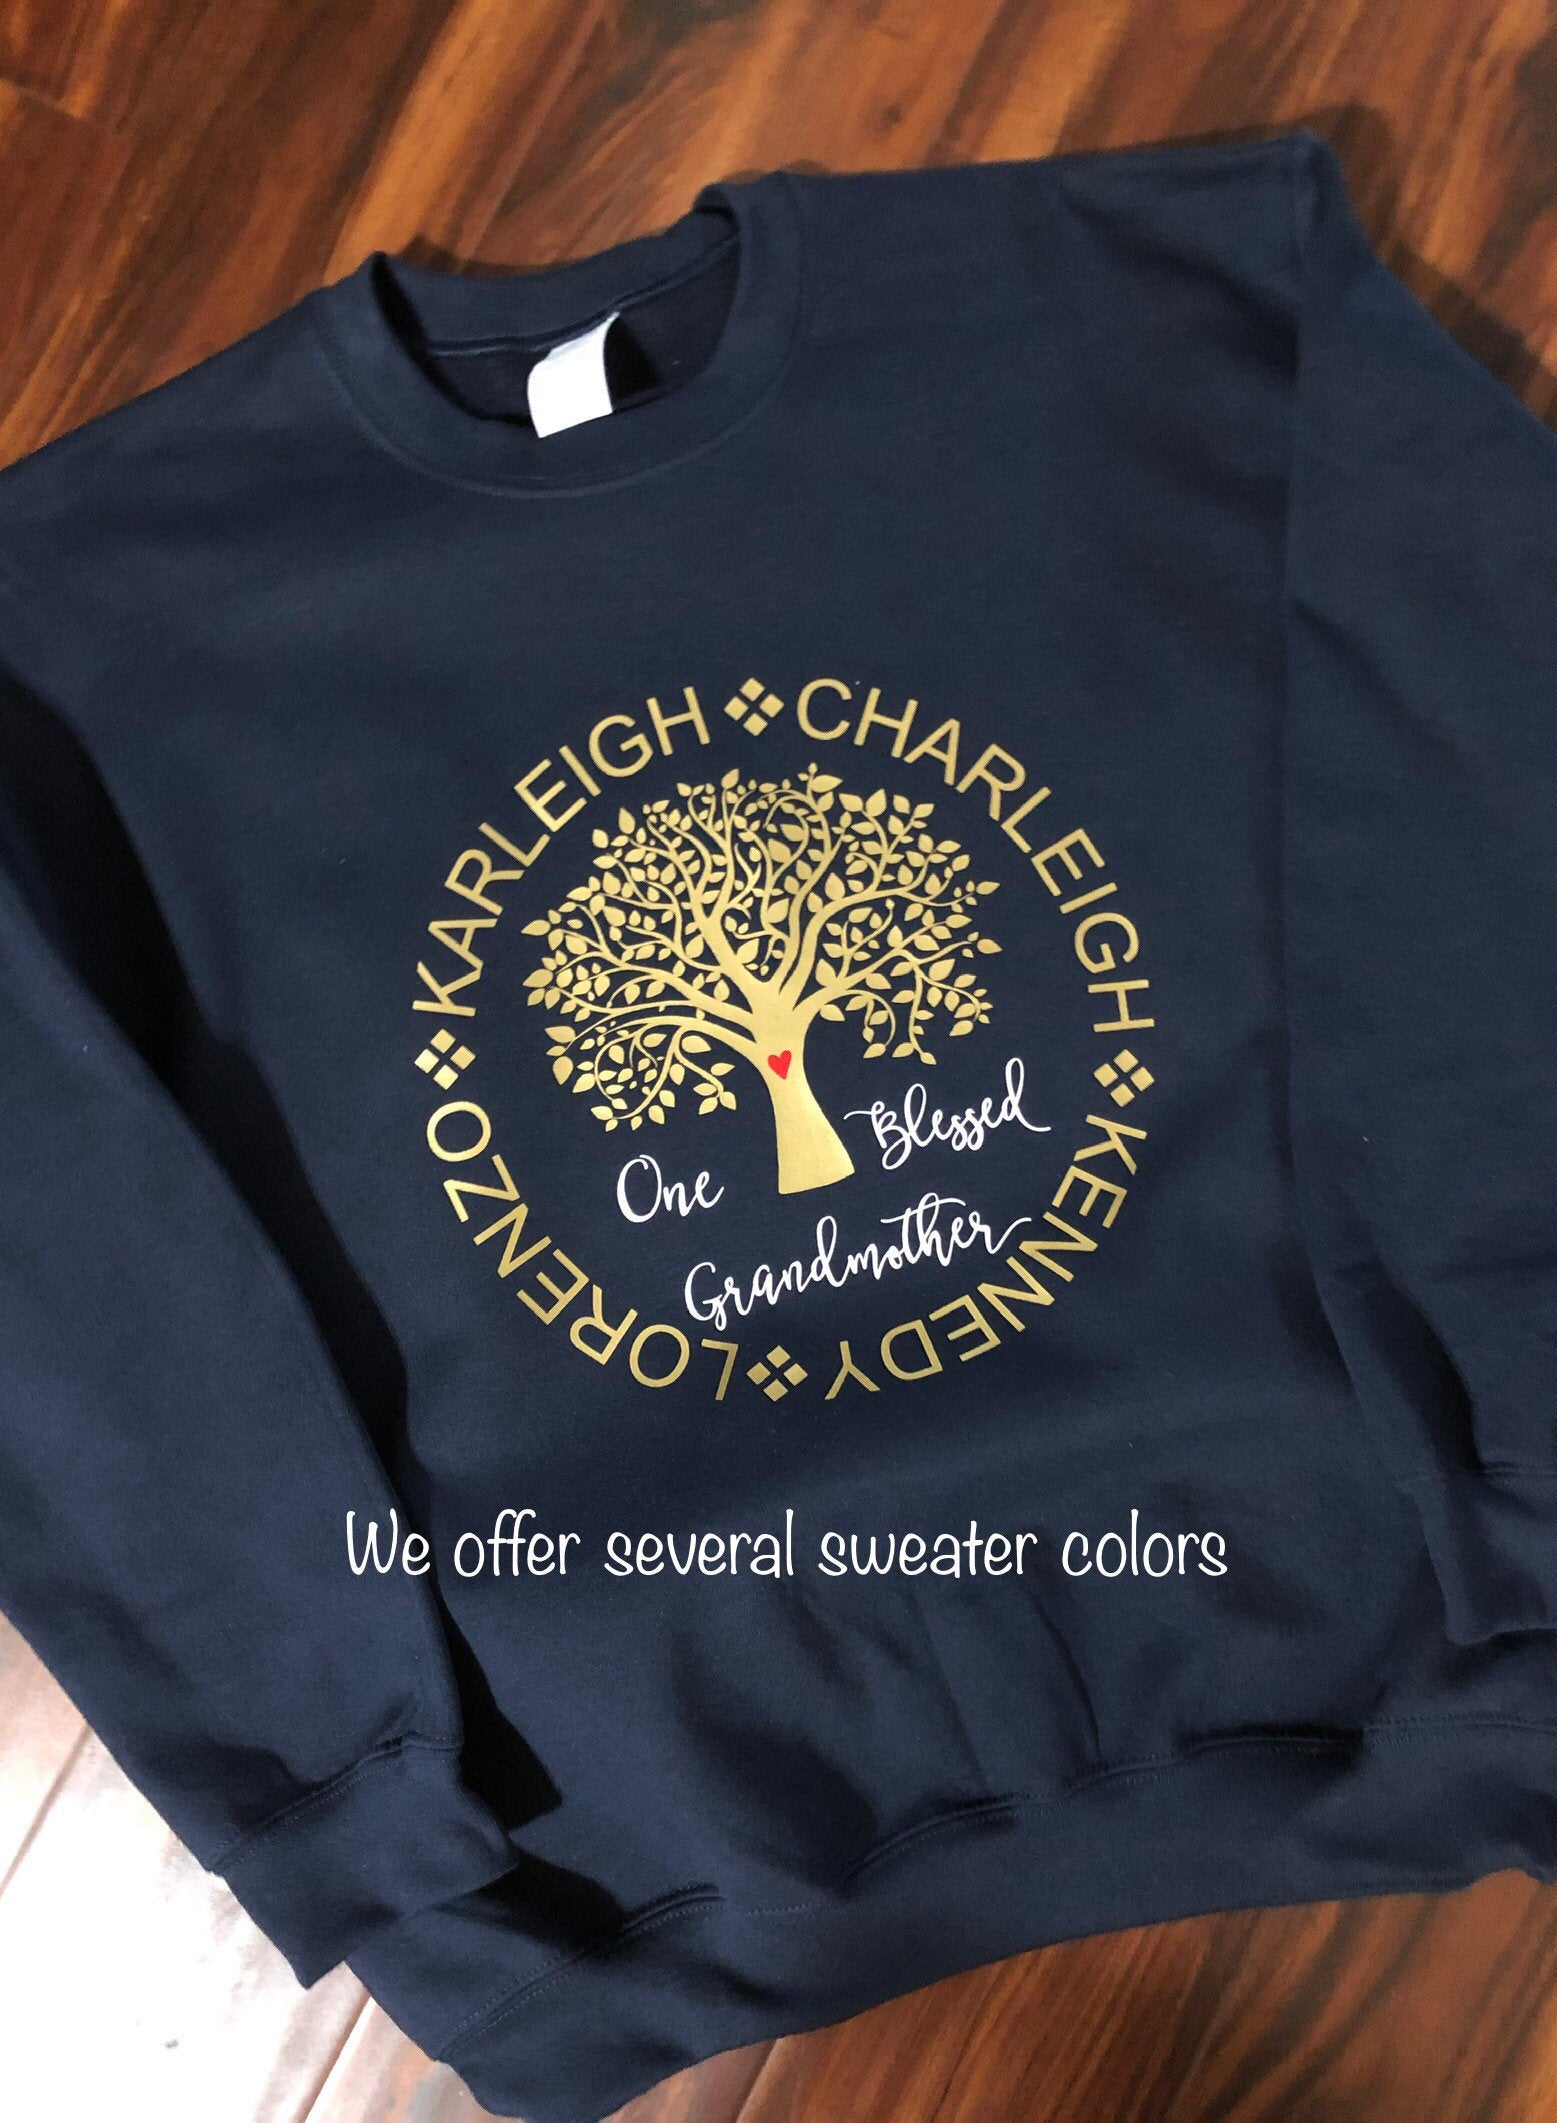 One Blessed Grandmother Tee or Sweater - - Endlessly Trendy Boutique